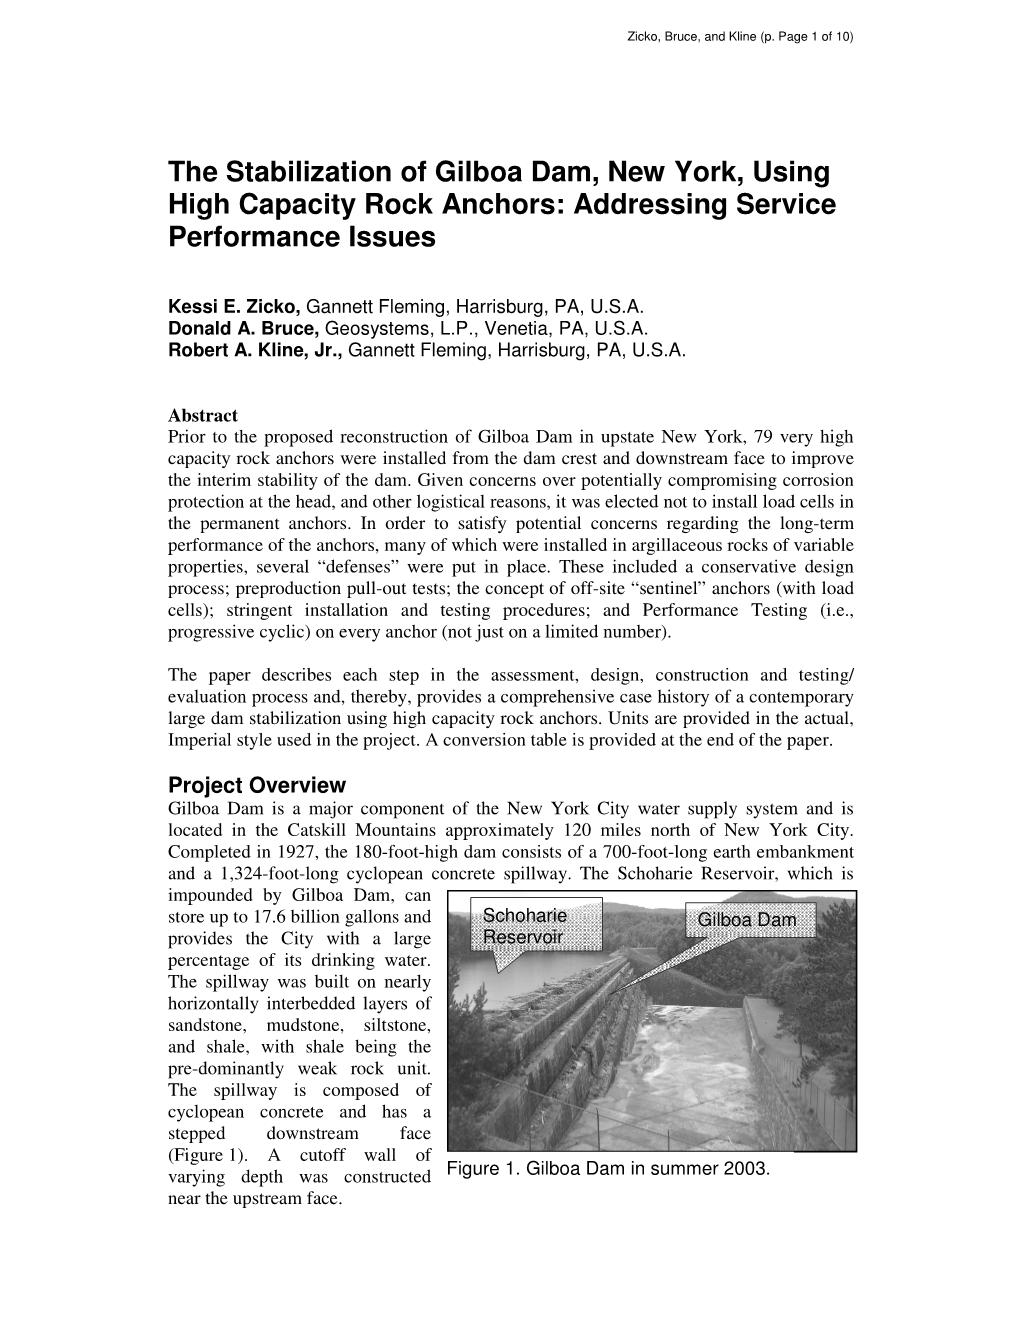 The Stabilization of Gilboa Dam, New York, Using High Capacity Rock Anchors: Addressing Service Performance Issues